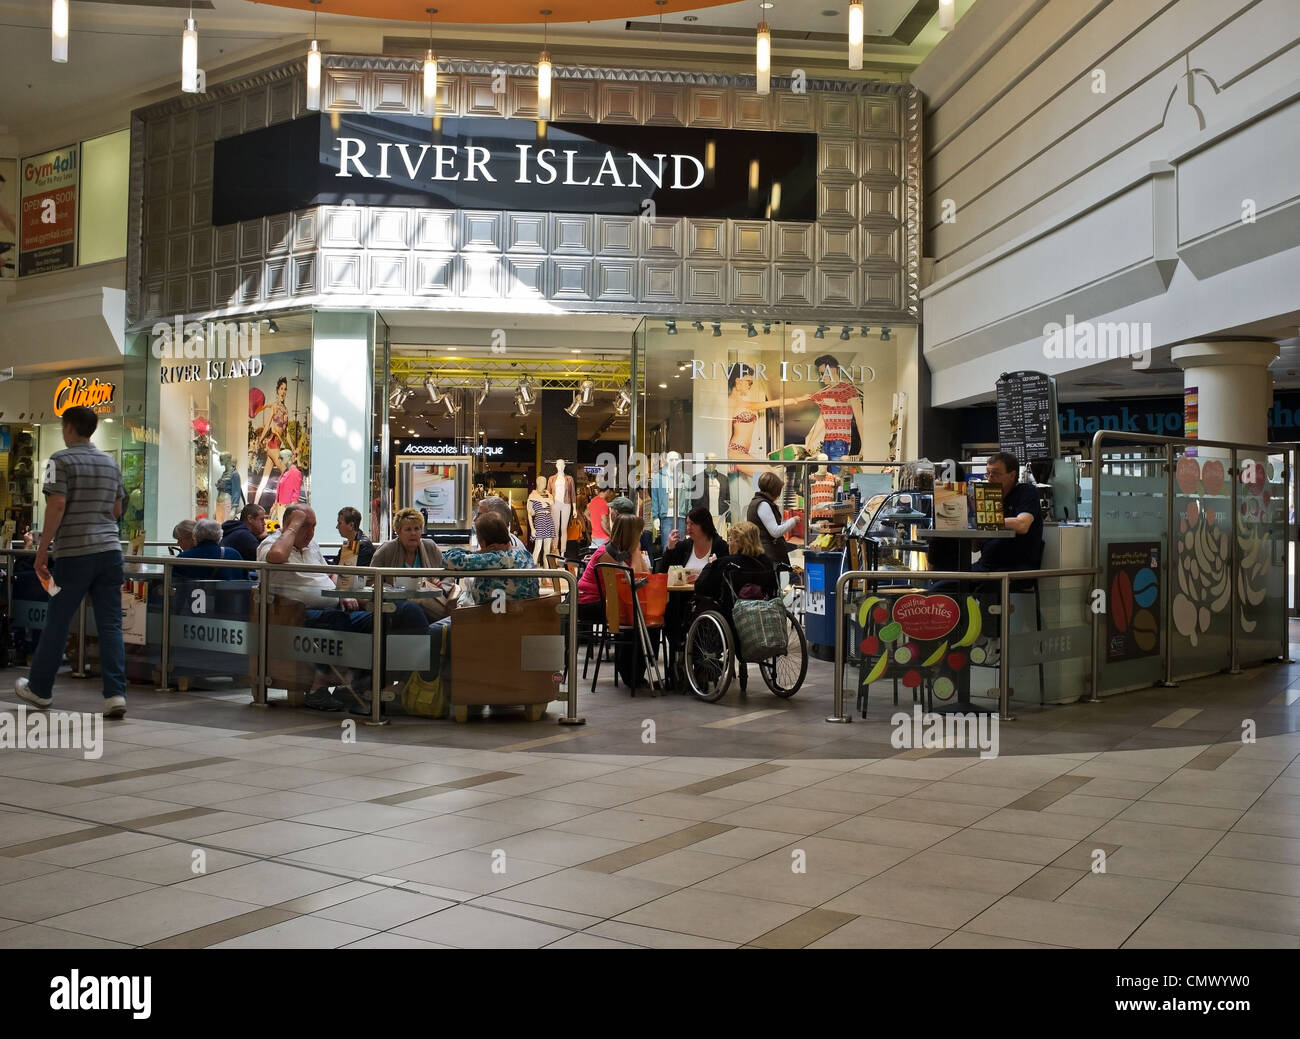 River Island store inside Eastgate Shopping Mall Stock Photo